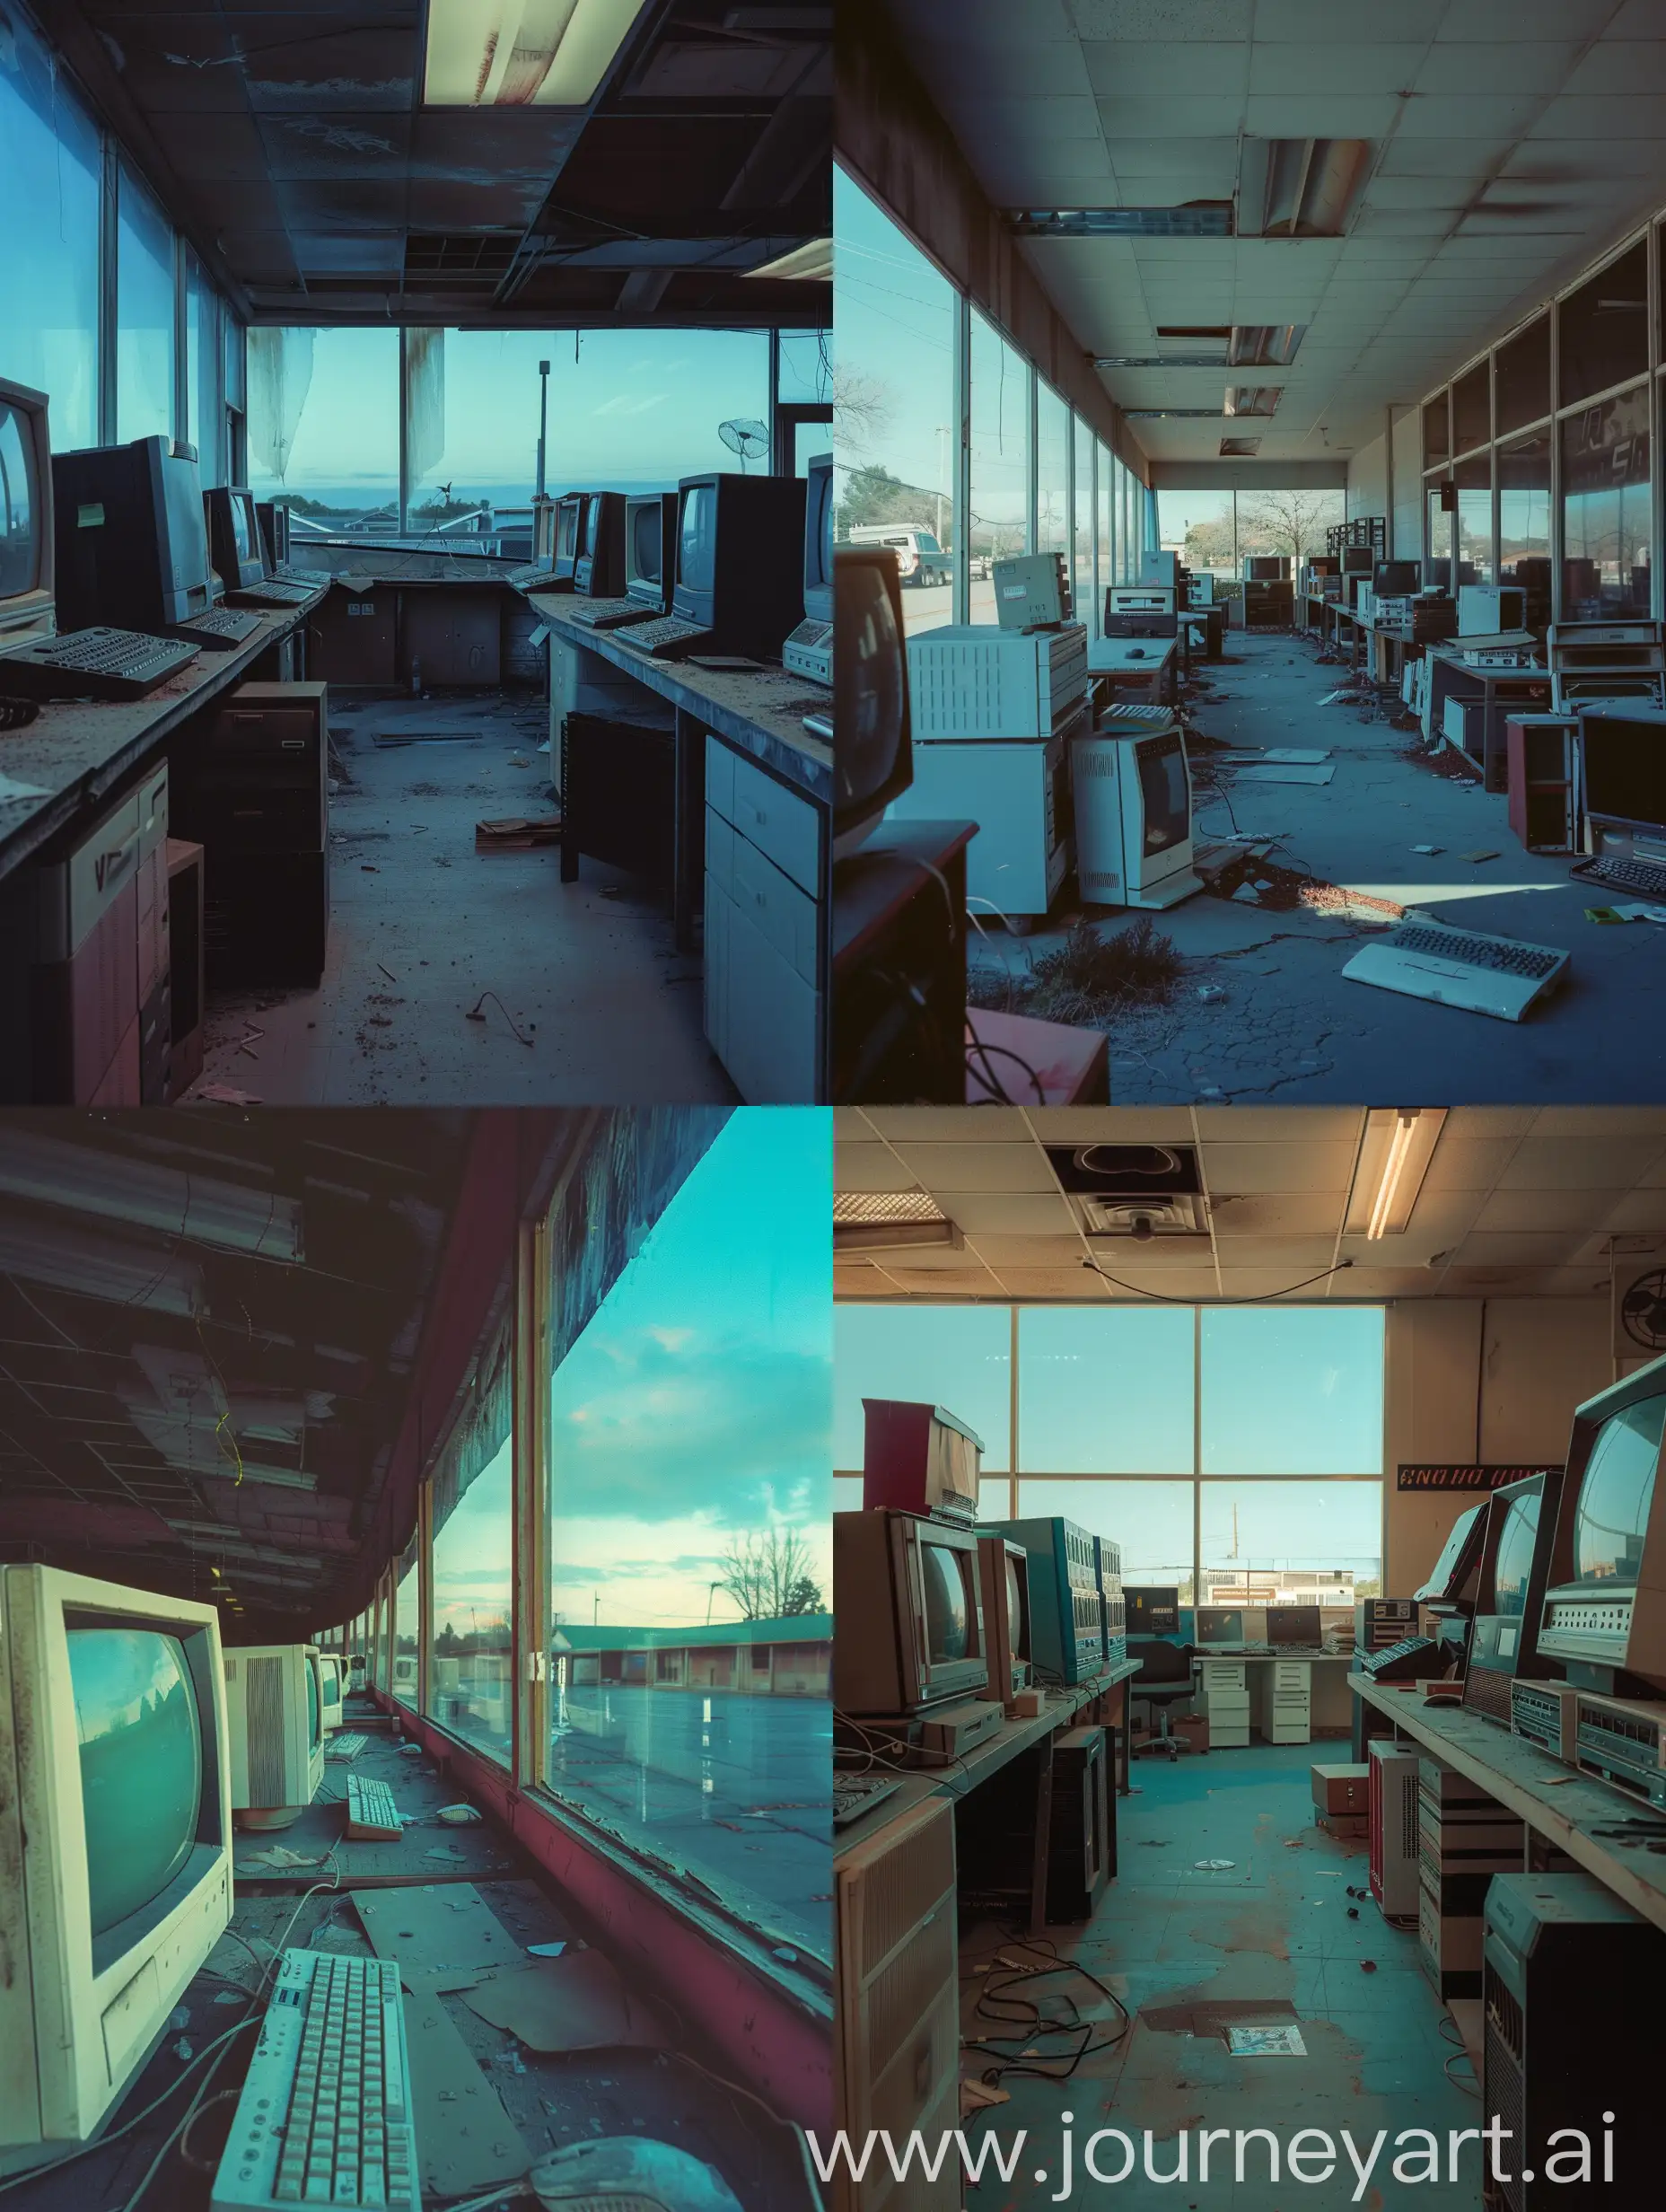 Abandoned-Computer-Shop-in-Early-2000s-Found-Footage-Aesthetic